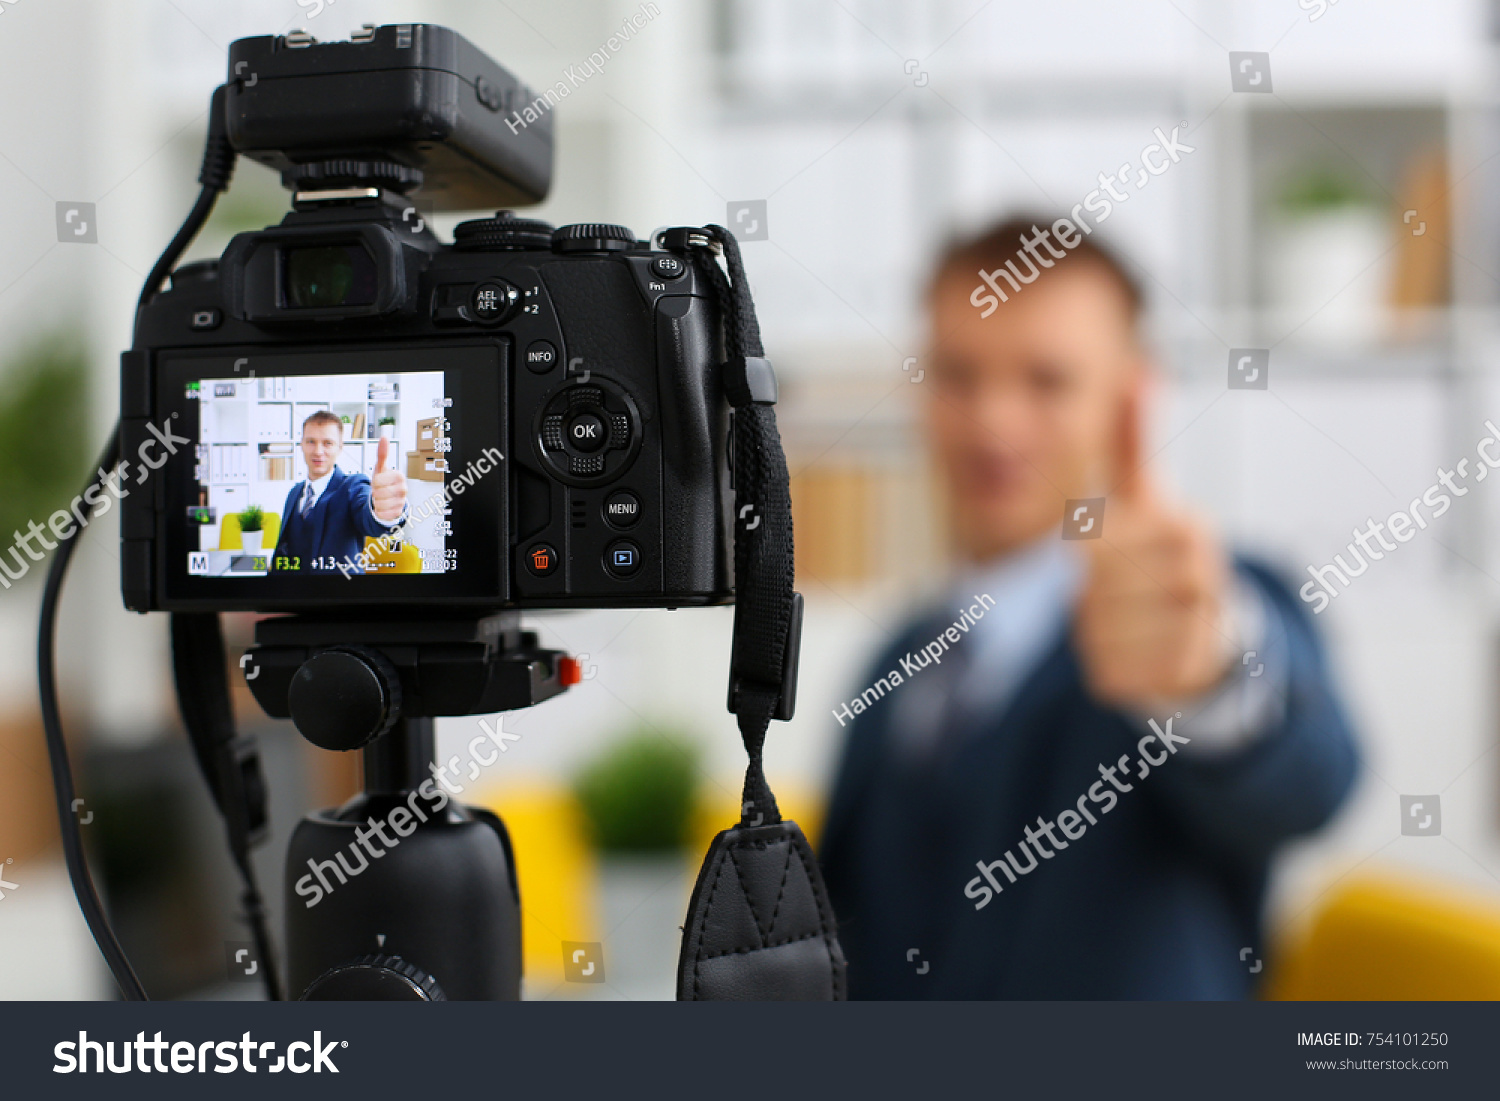 Male in suit and tie show confirm sign arm making promo videoblog or photo session in office camcorder to tripod closeup. Vlogger promotion selfie solution or finance advisor management information #754101250